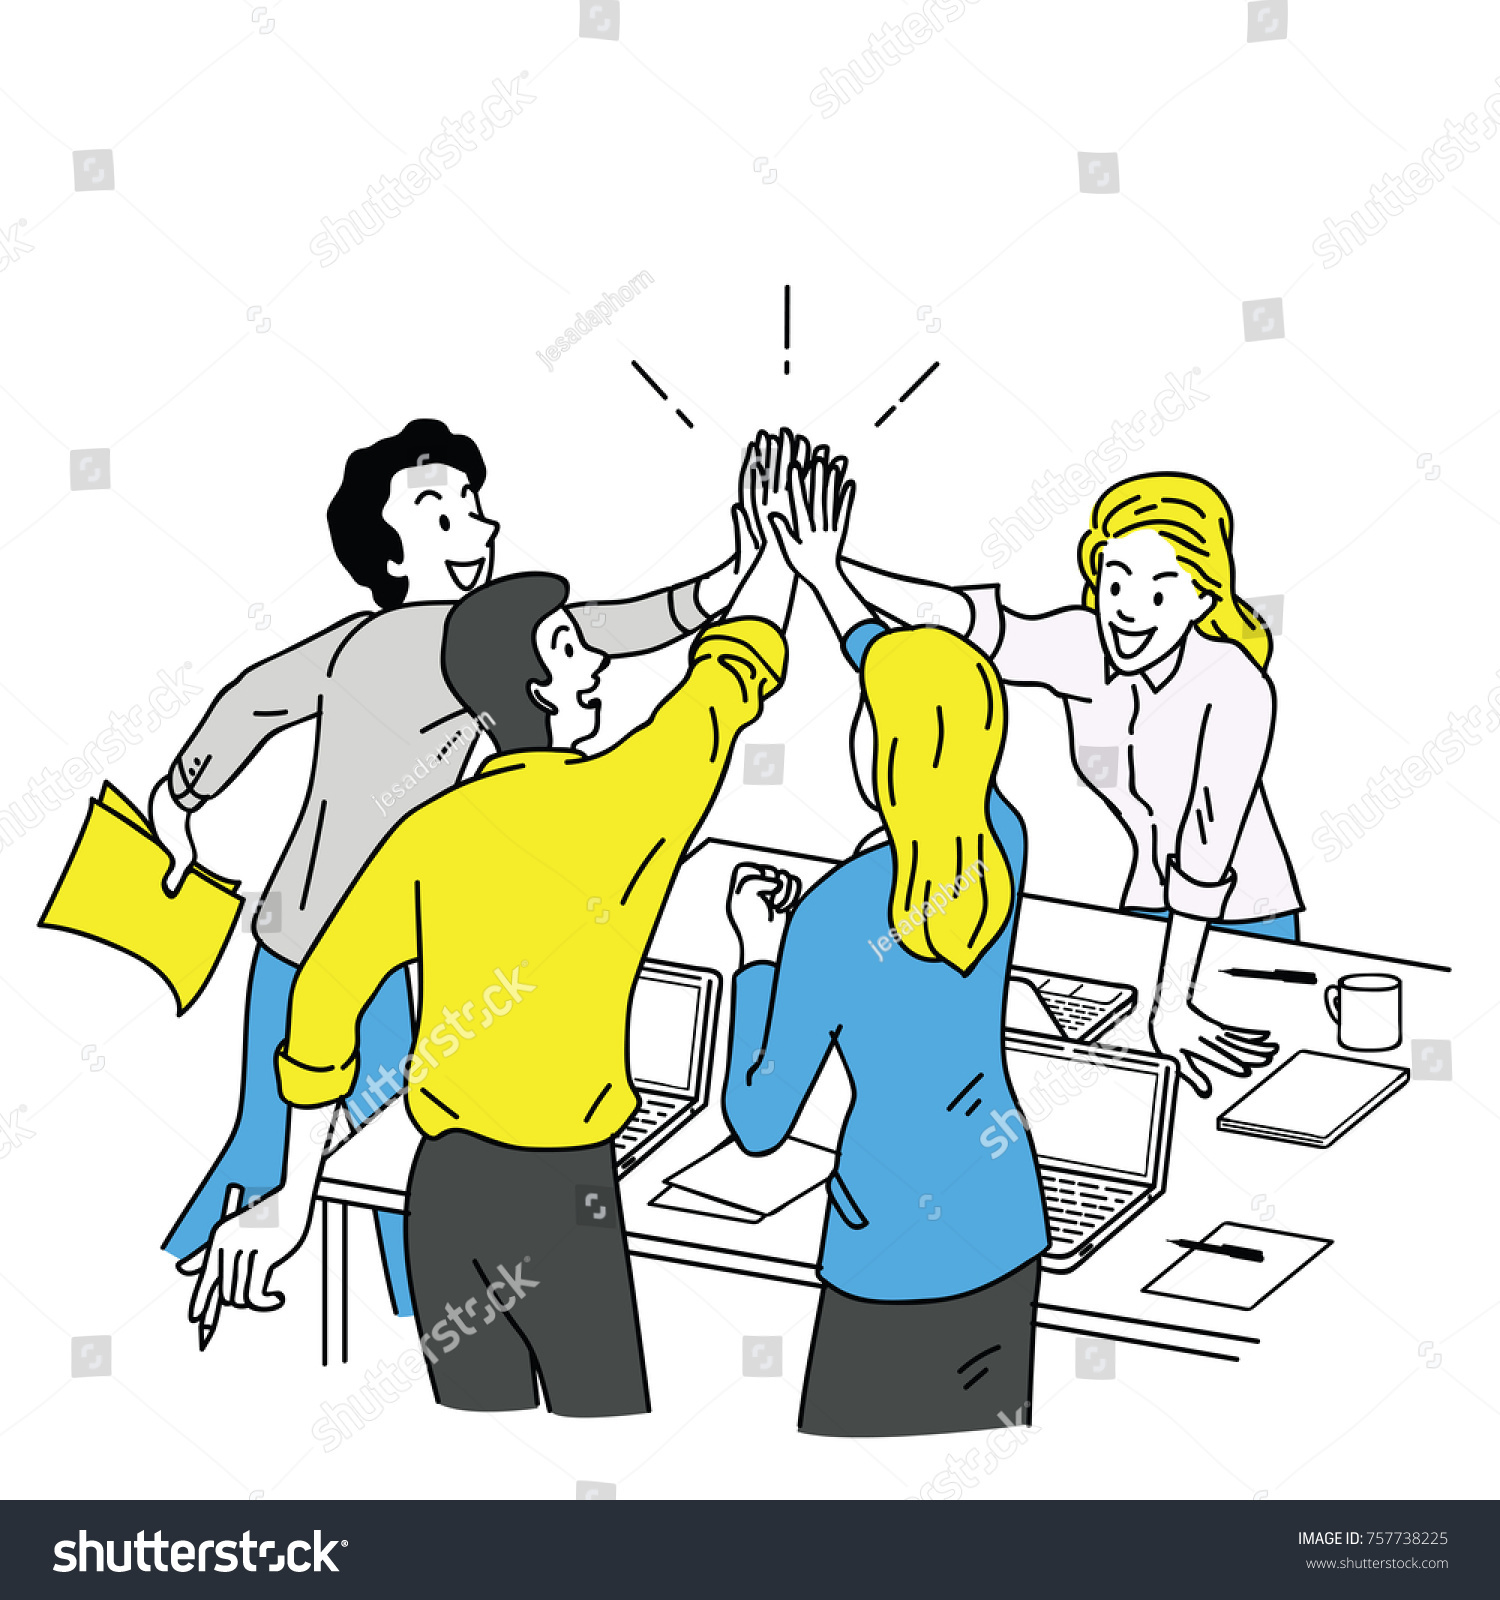 stock-vector-group-of-businesspeople-man-and-woman-giving-high-five-in-business-concept-of-corporate-success-757738225